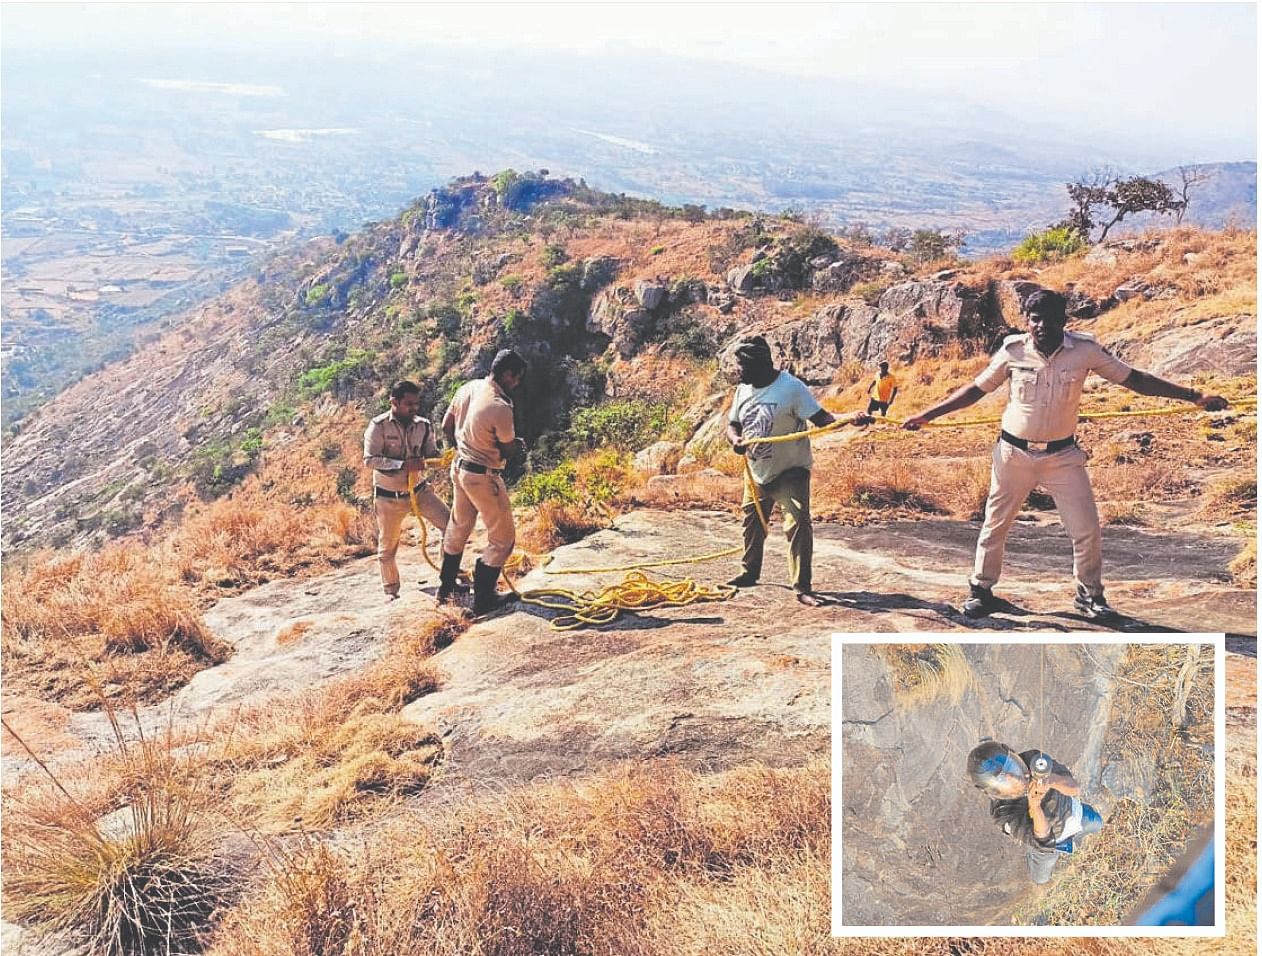 ishank Sharma (inset) fell into a 300-ft gorge in Nandi Hills while trekking on Sunday and was rescued by the Indian Air Force personnel.